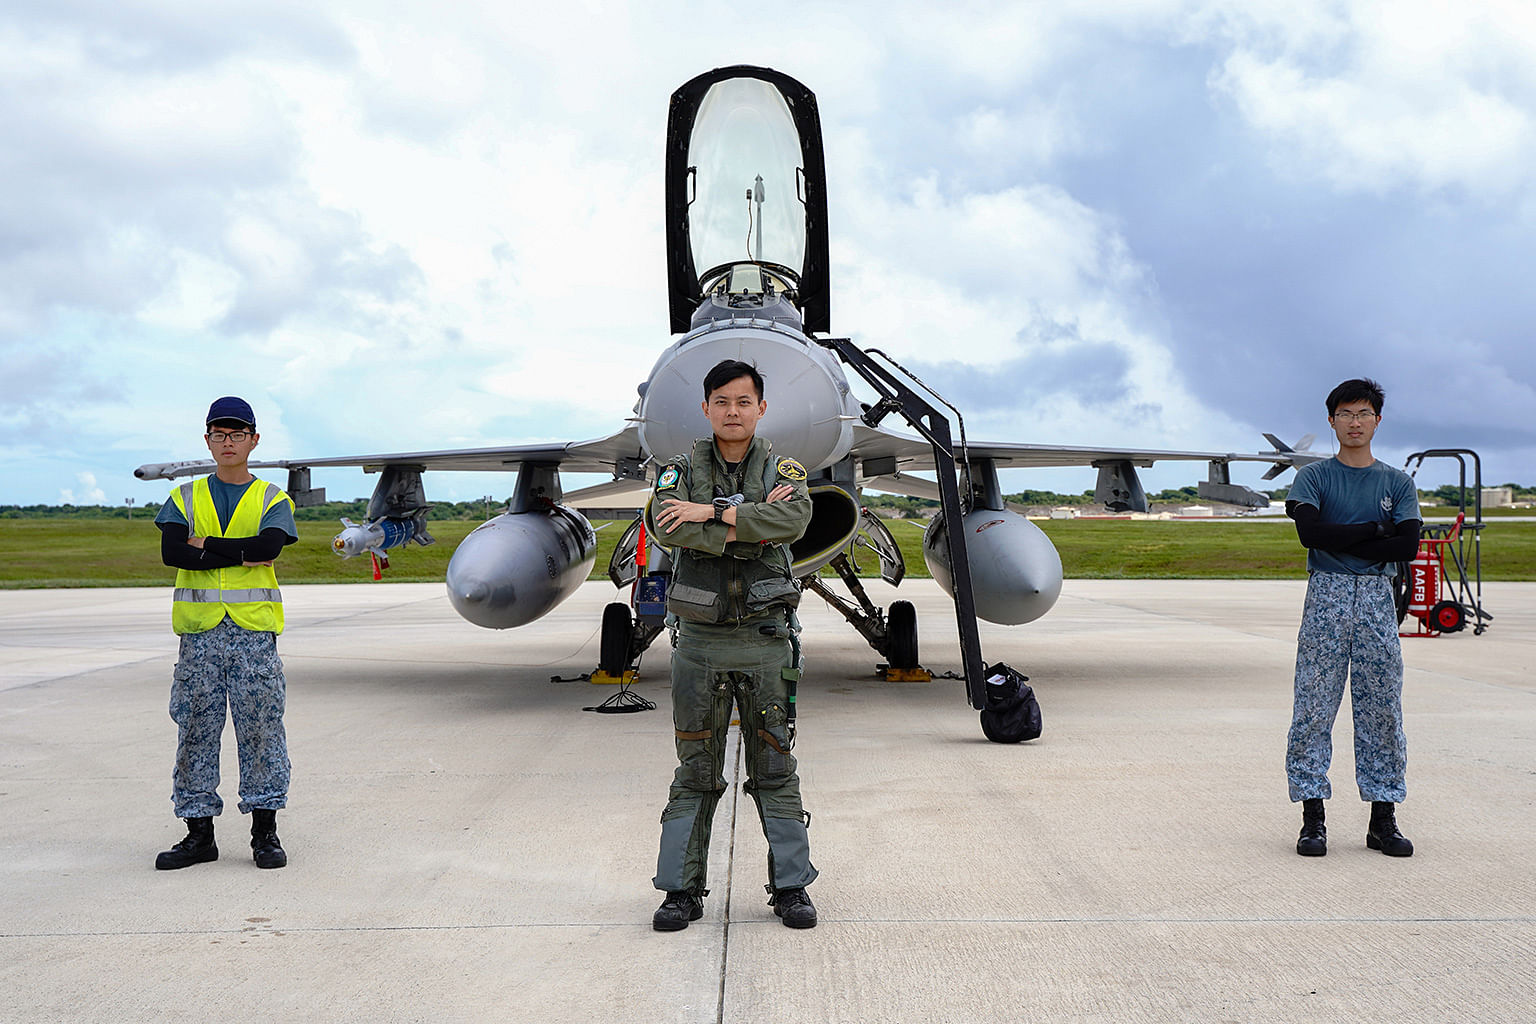  LTC Lau of the Republic of Singapore Airforce with his teammate